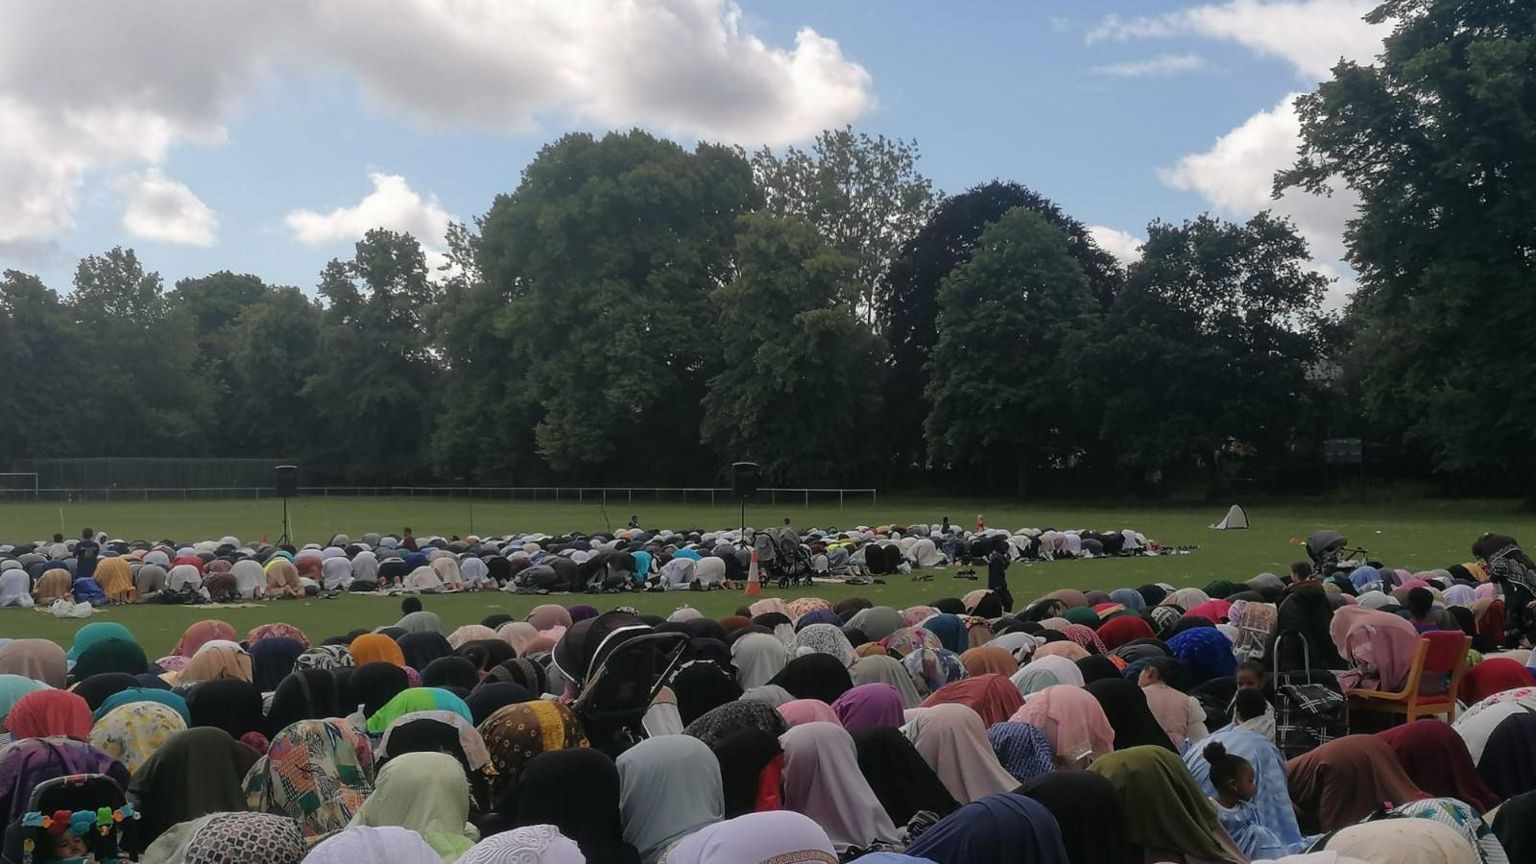 Muslims praying in the park